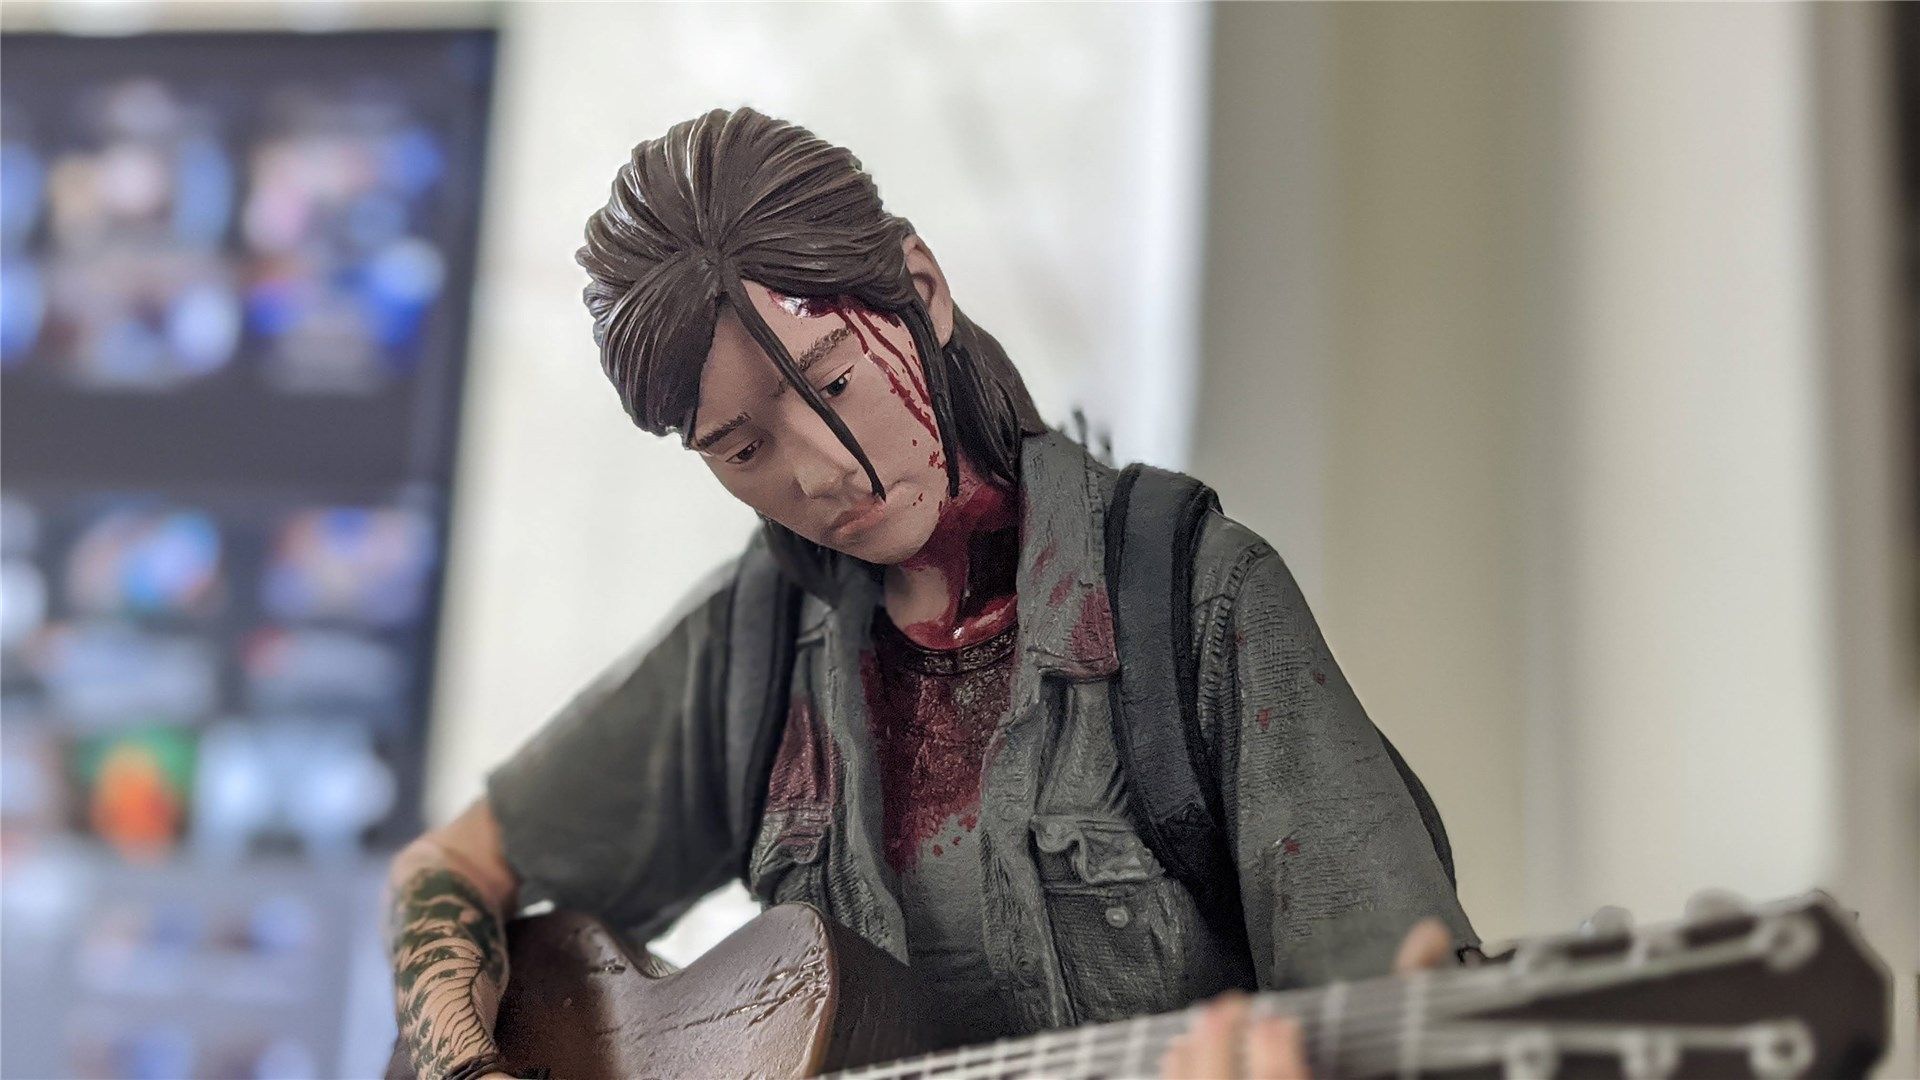 A portrait shot of the Ellie statue in The Last of Us Part II Collector's Edition box